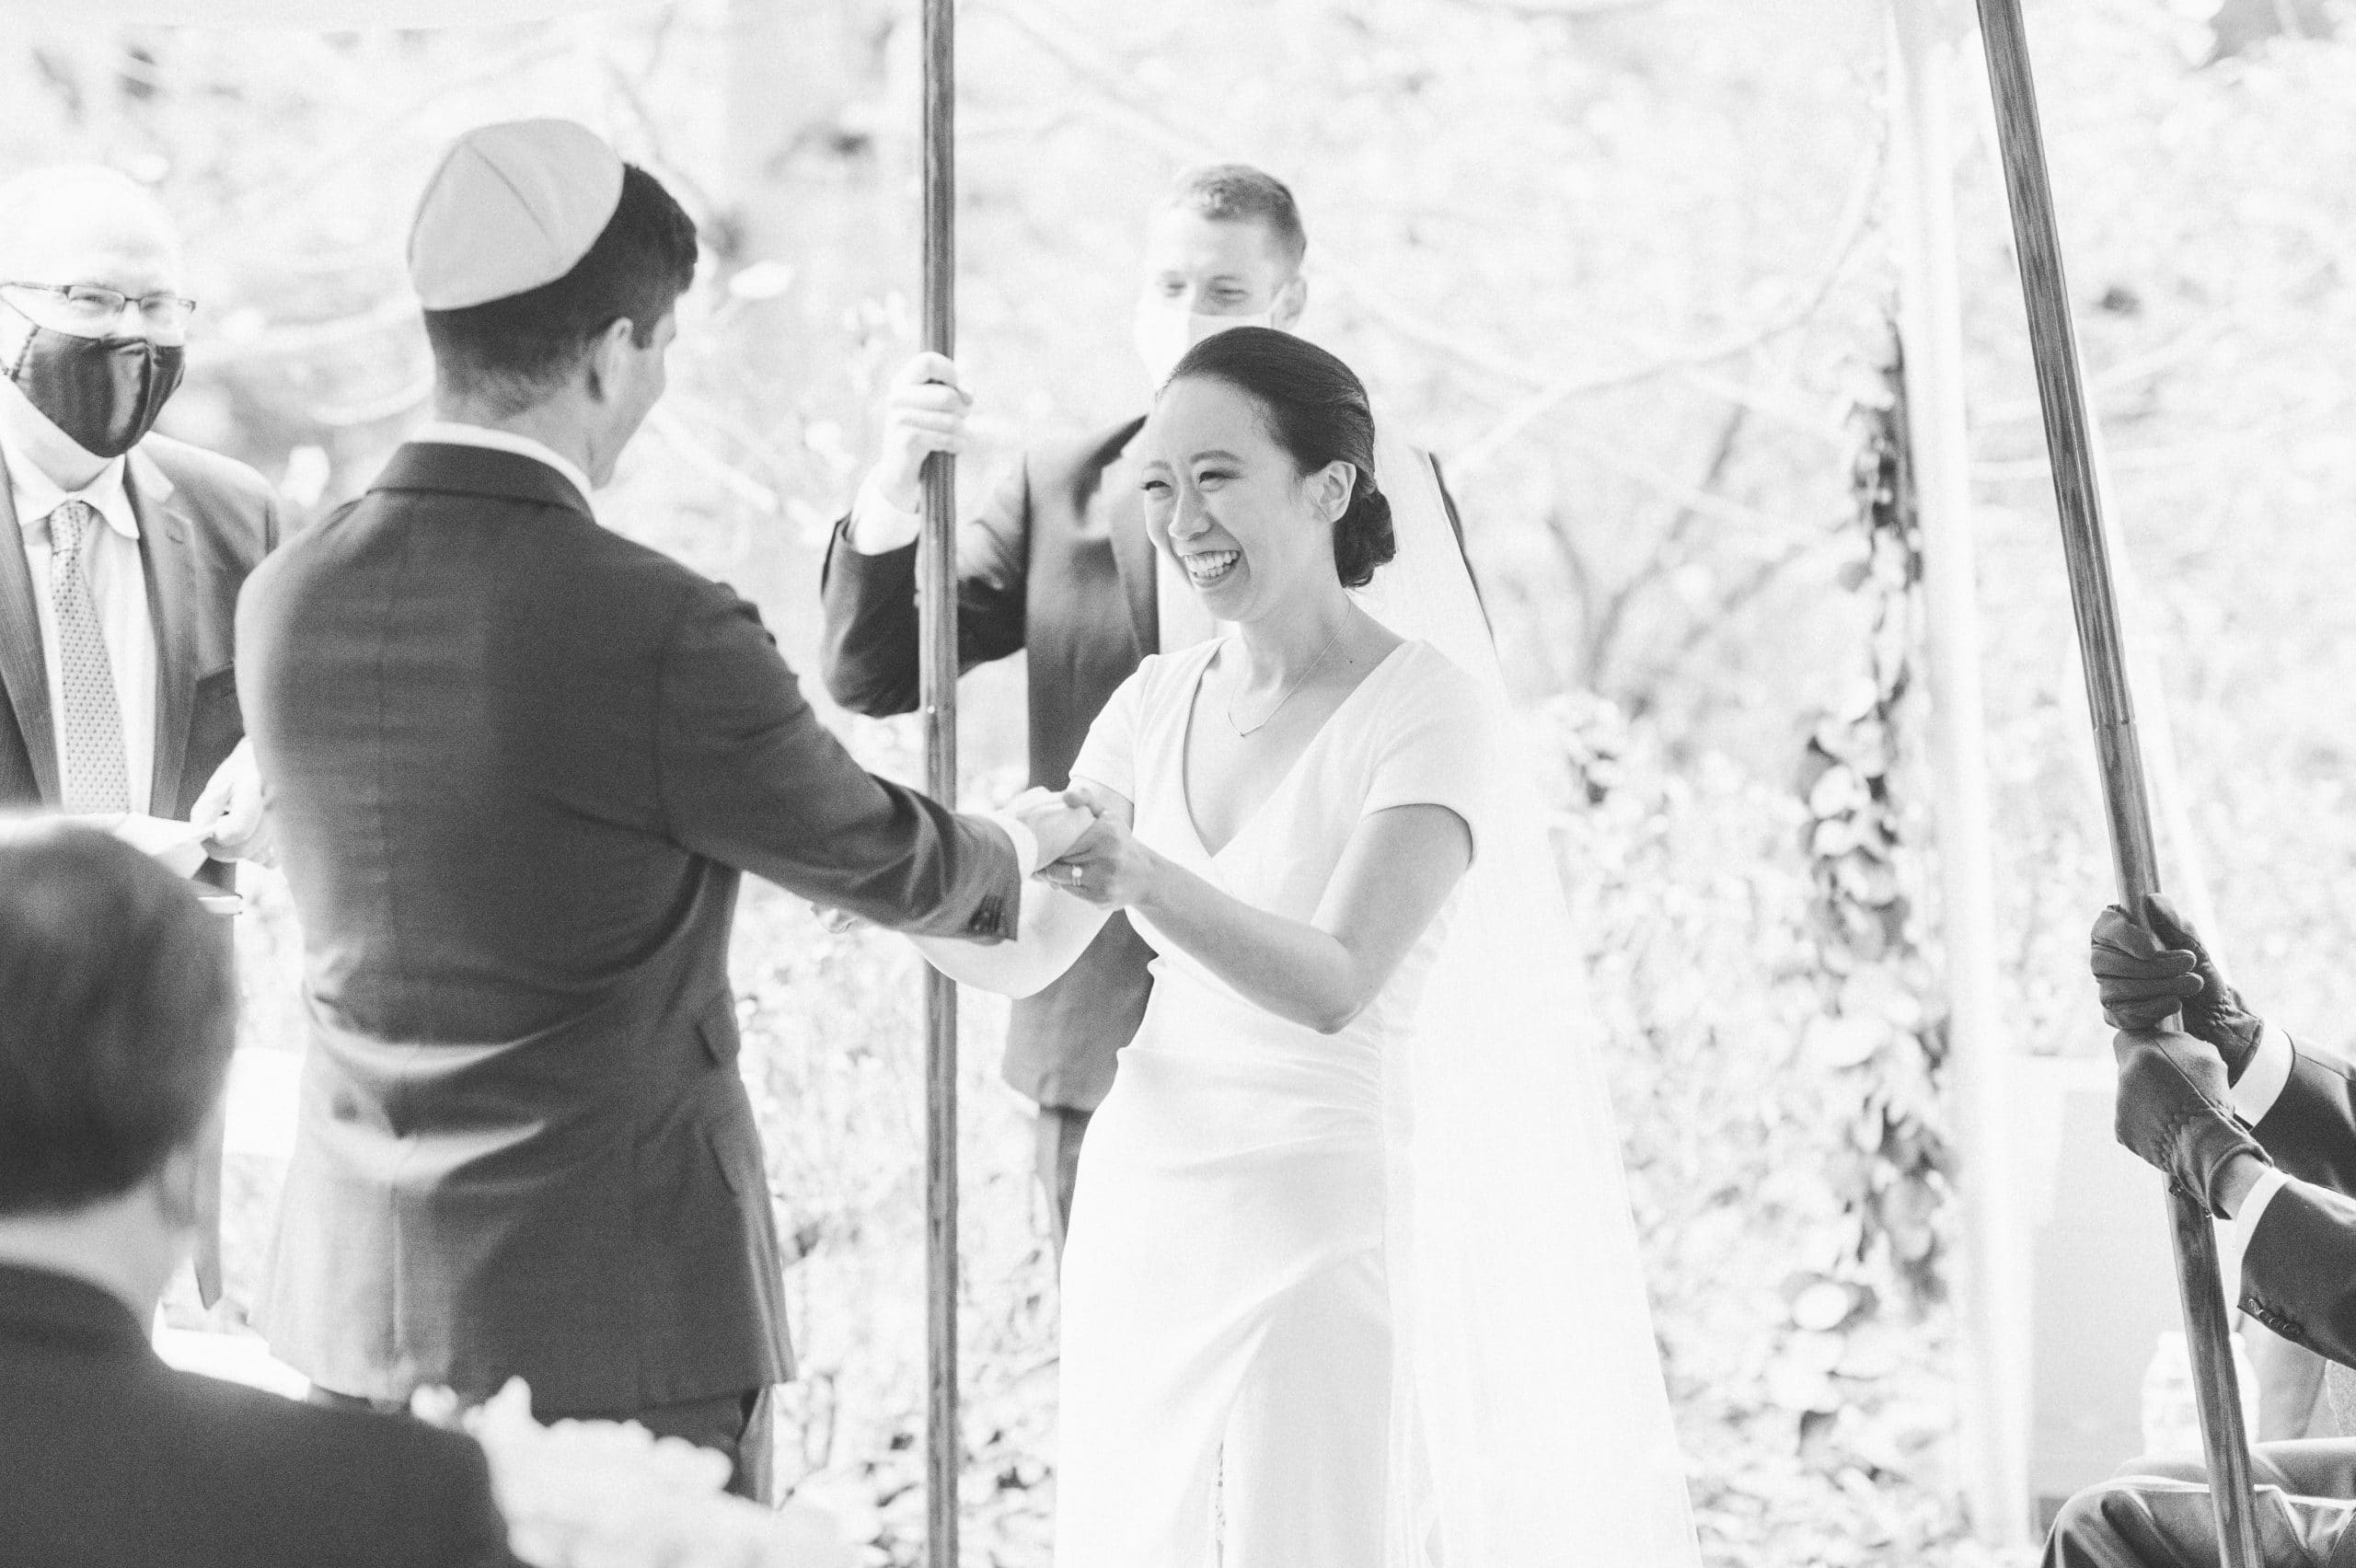 COVID19 Intimate micro-wedding at Reeves Reed Arboretum with Ketubah signing and Chinese tea ceremony, captured by fun, candid, documentary NJ wedding photographer Ben Lau.